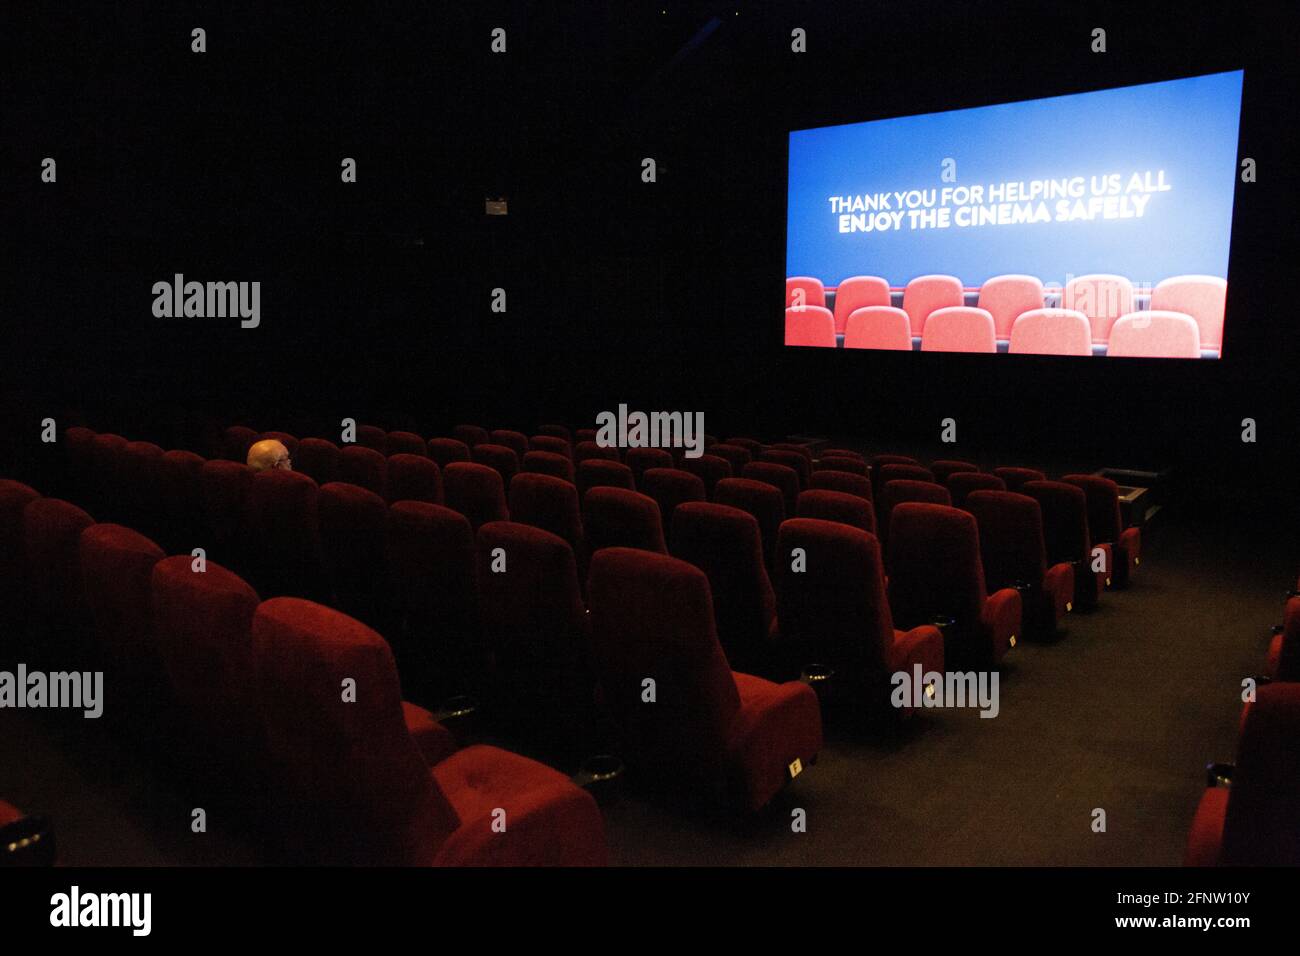 London, UK, 19 May 2021: The Clapham Picturehouse cinema reopens today for a lone lunchtime viewer but evening shows more booked up. The screens will opperate at less than 50% of capacity for social distancing and audiences are required to wear face masks. Anna Watson/Alamy Live News Stock Photo